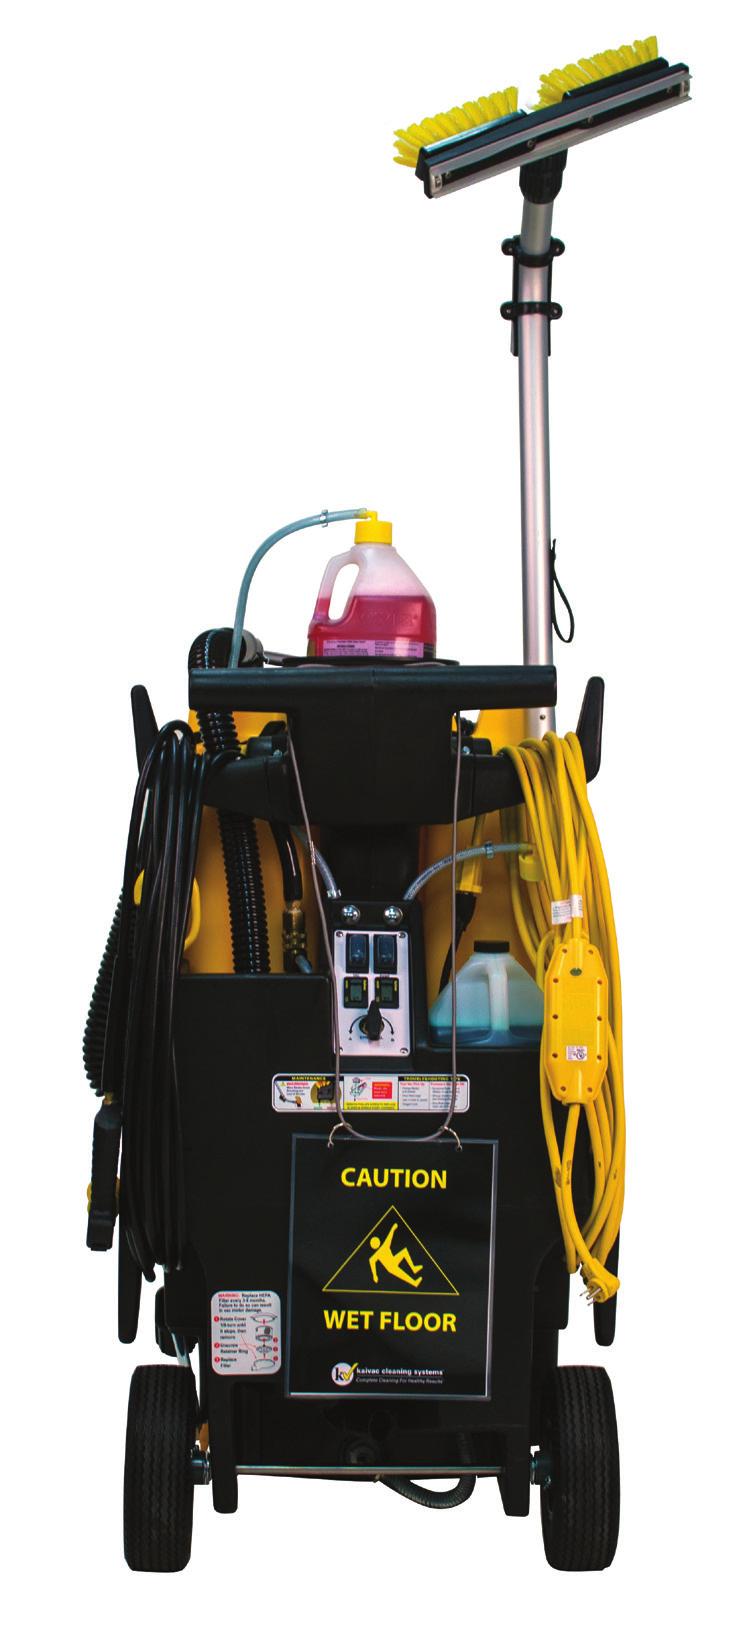 SOLUTION STATION Safety, Accuracy, Flexibility and Cost Control The WAXIE VERSA, VERSA II and Solution Station 3-liter bottles of superconcentrates are designed to dispense readyto-use solutions for